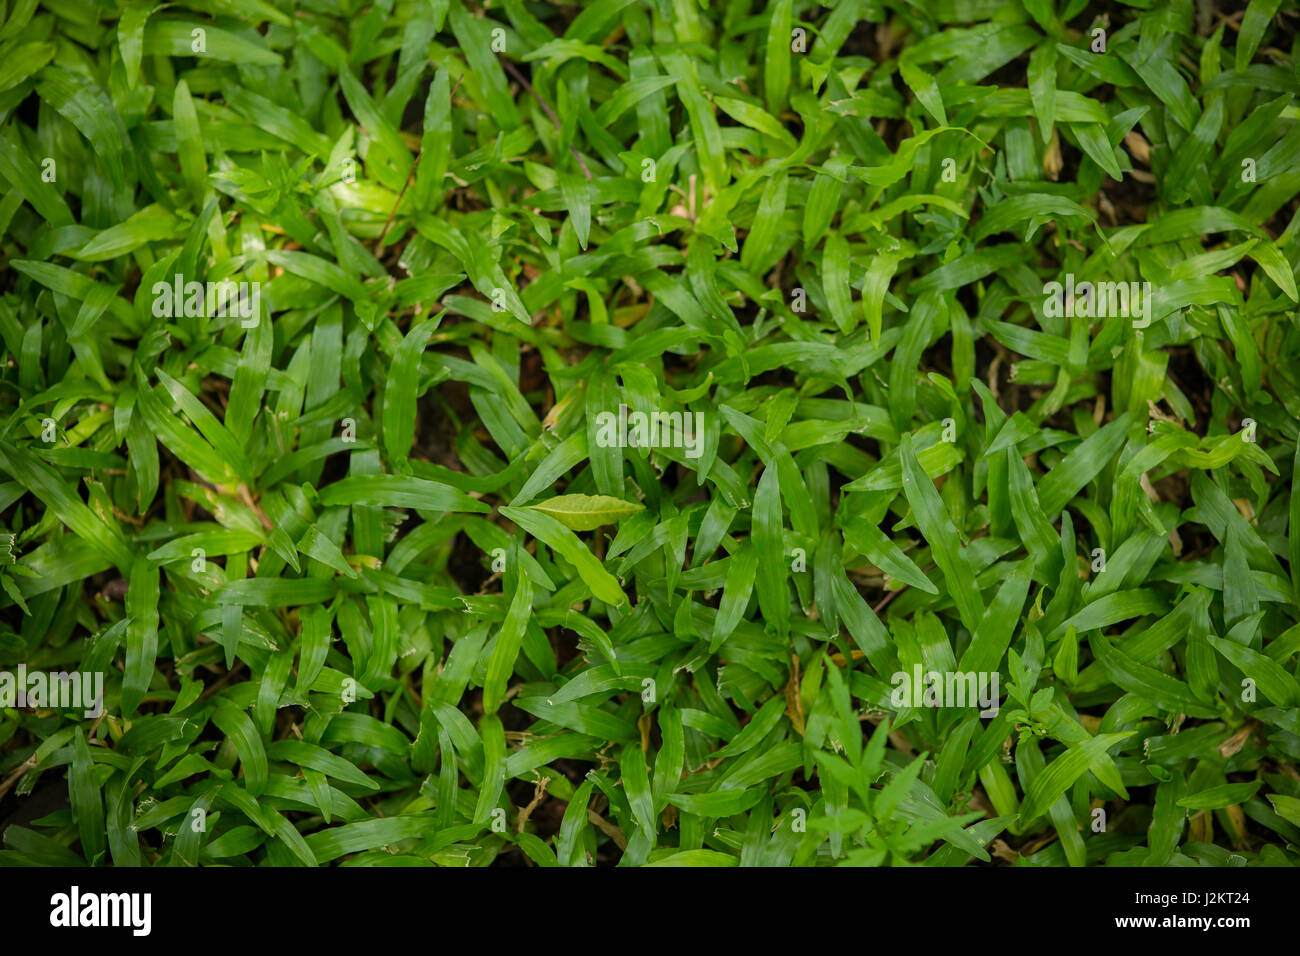 Green grass seamless texture. Seamless in only horizontal dimension. Stock Photo